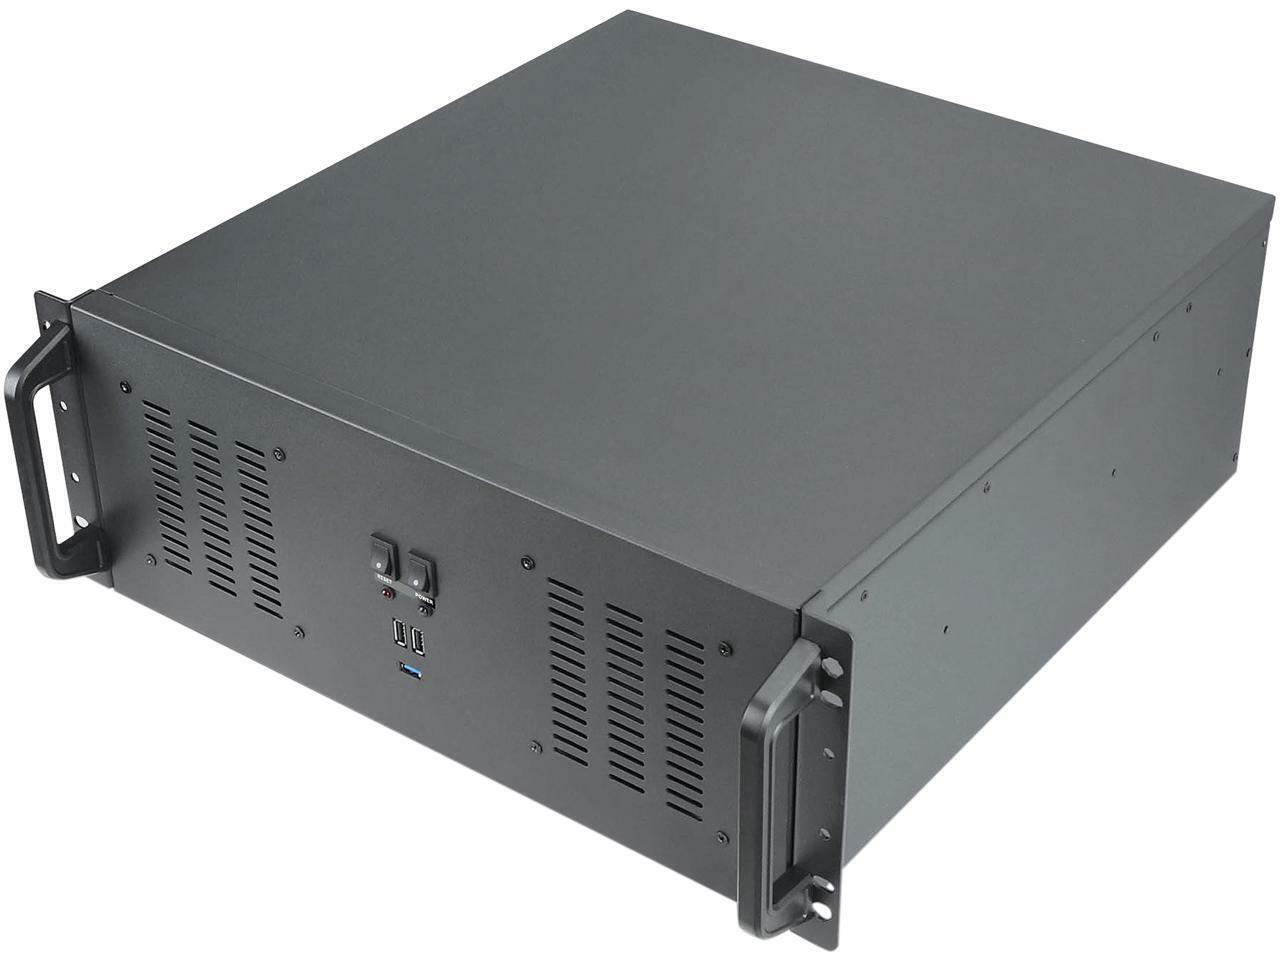 Rosewill 4U Server Chassis Rackmount Case | 11x 3.5